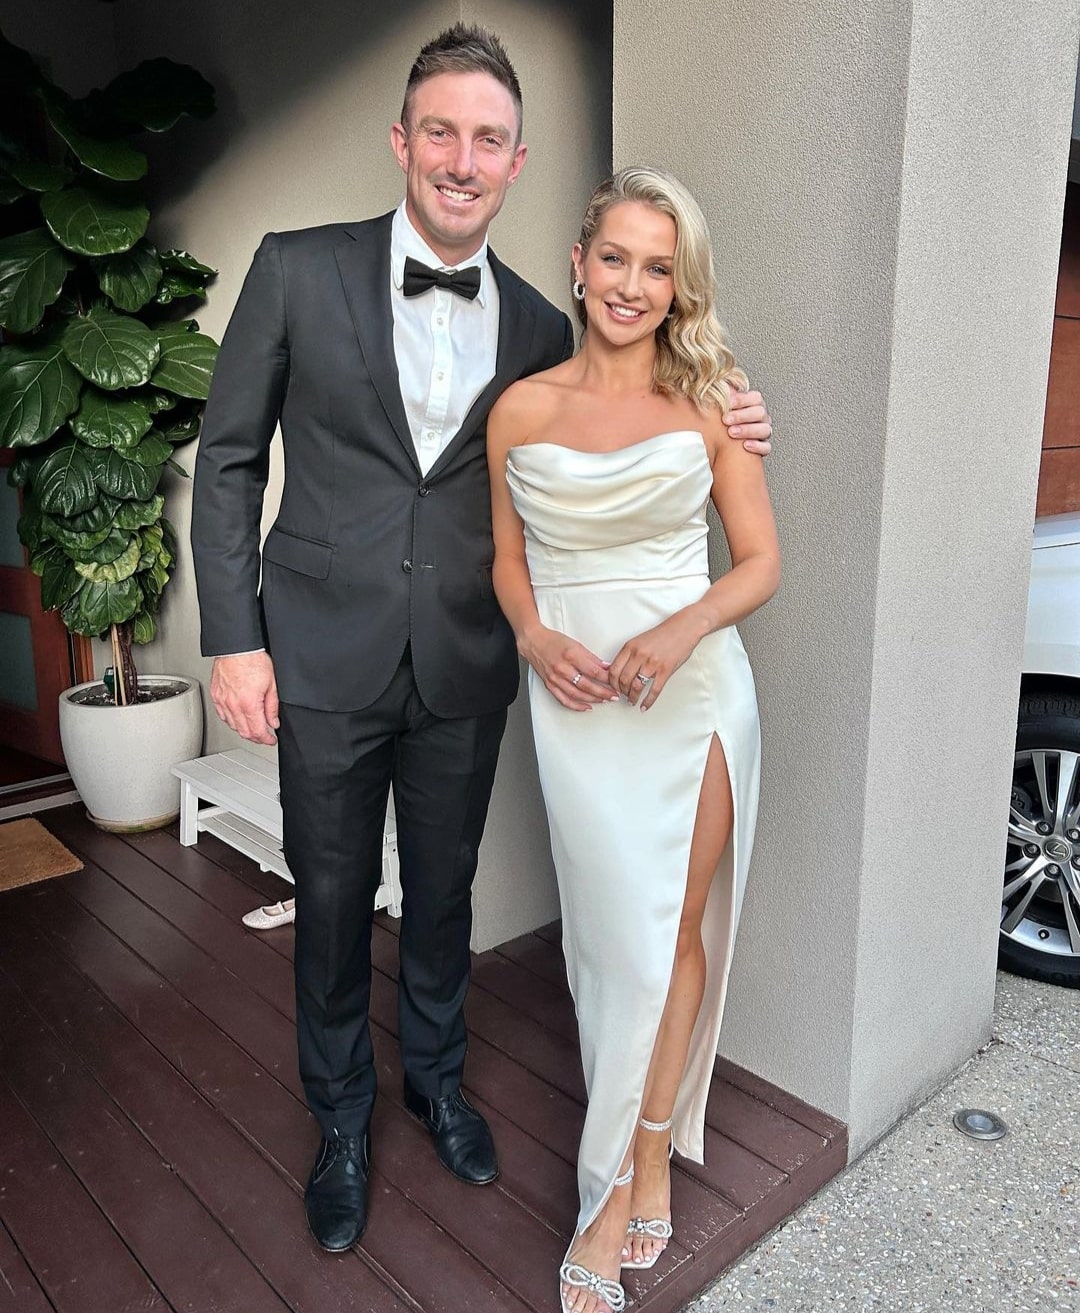 Australian Player's Wives and Girlfriends 2023